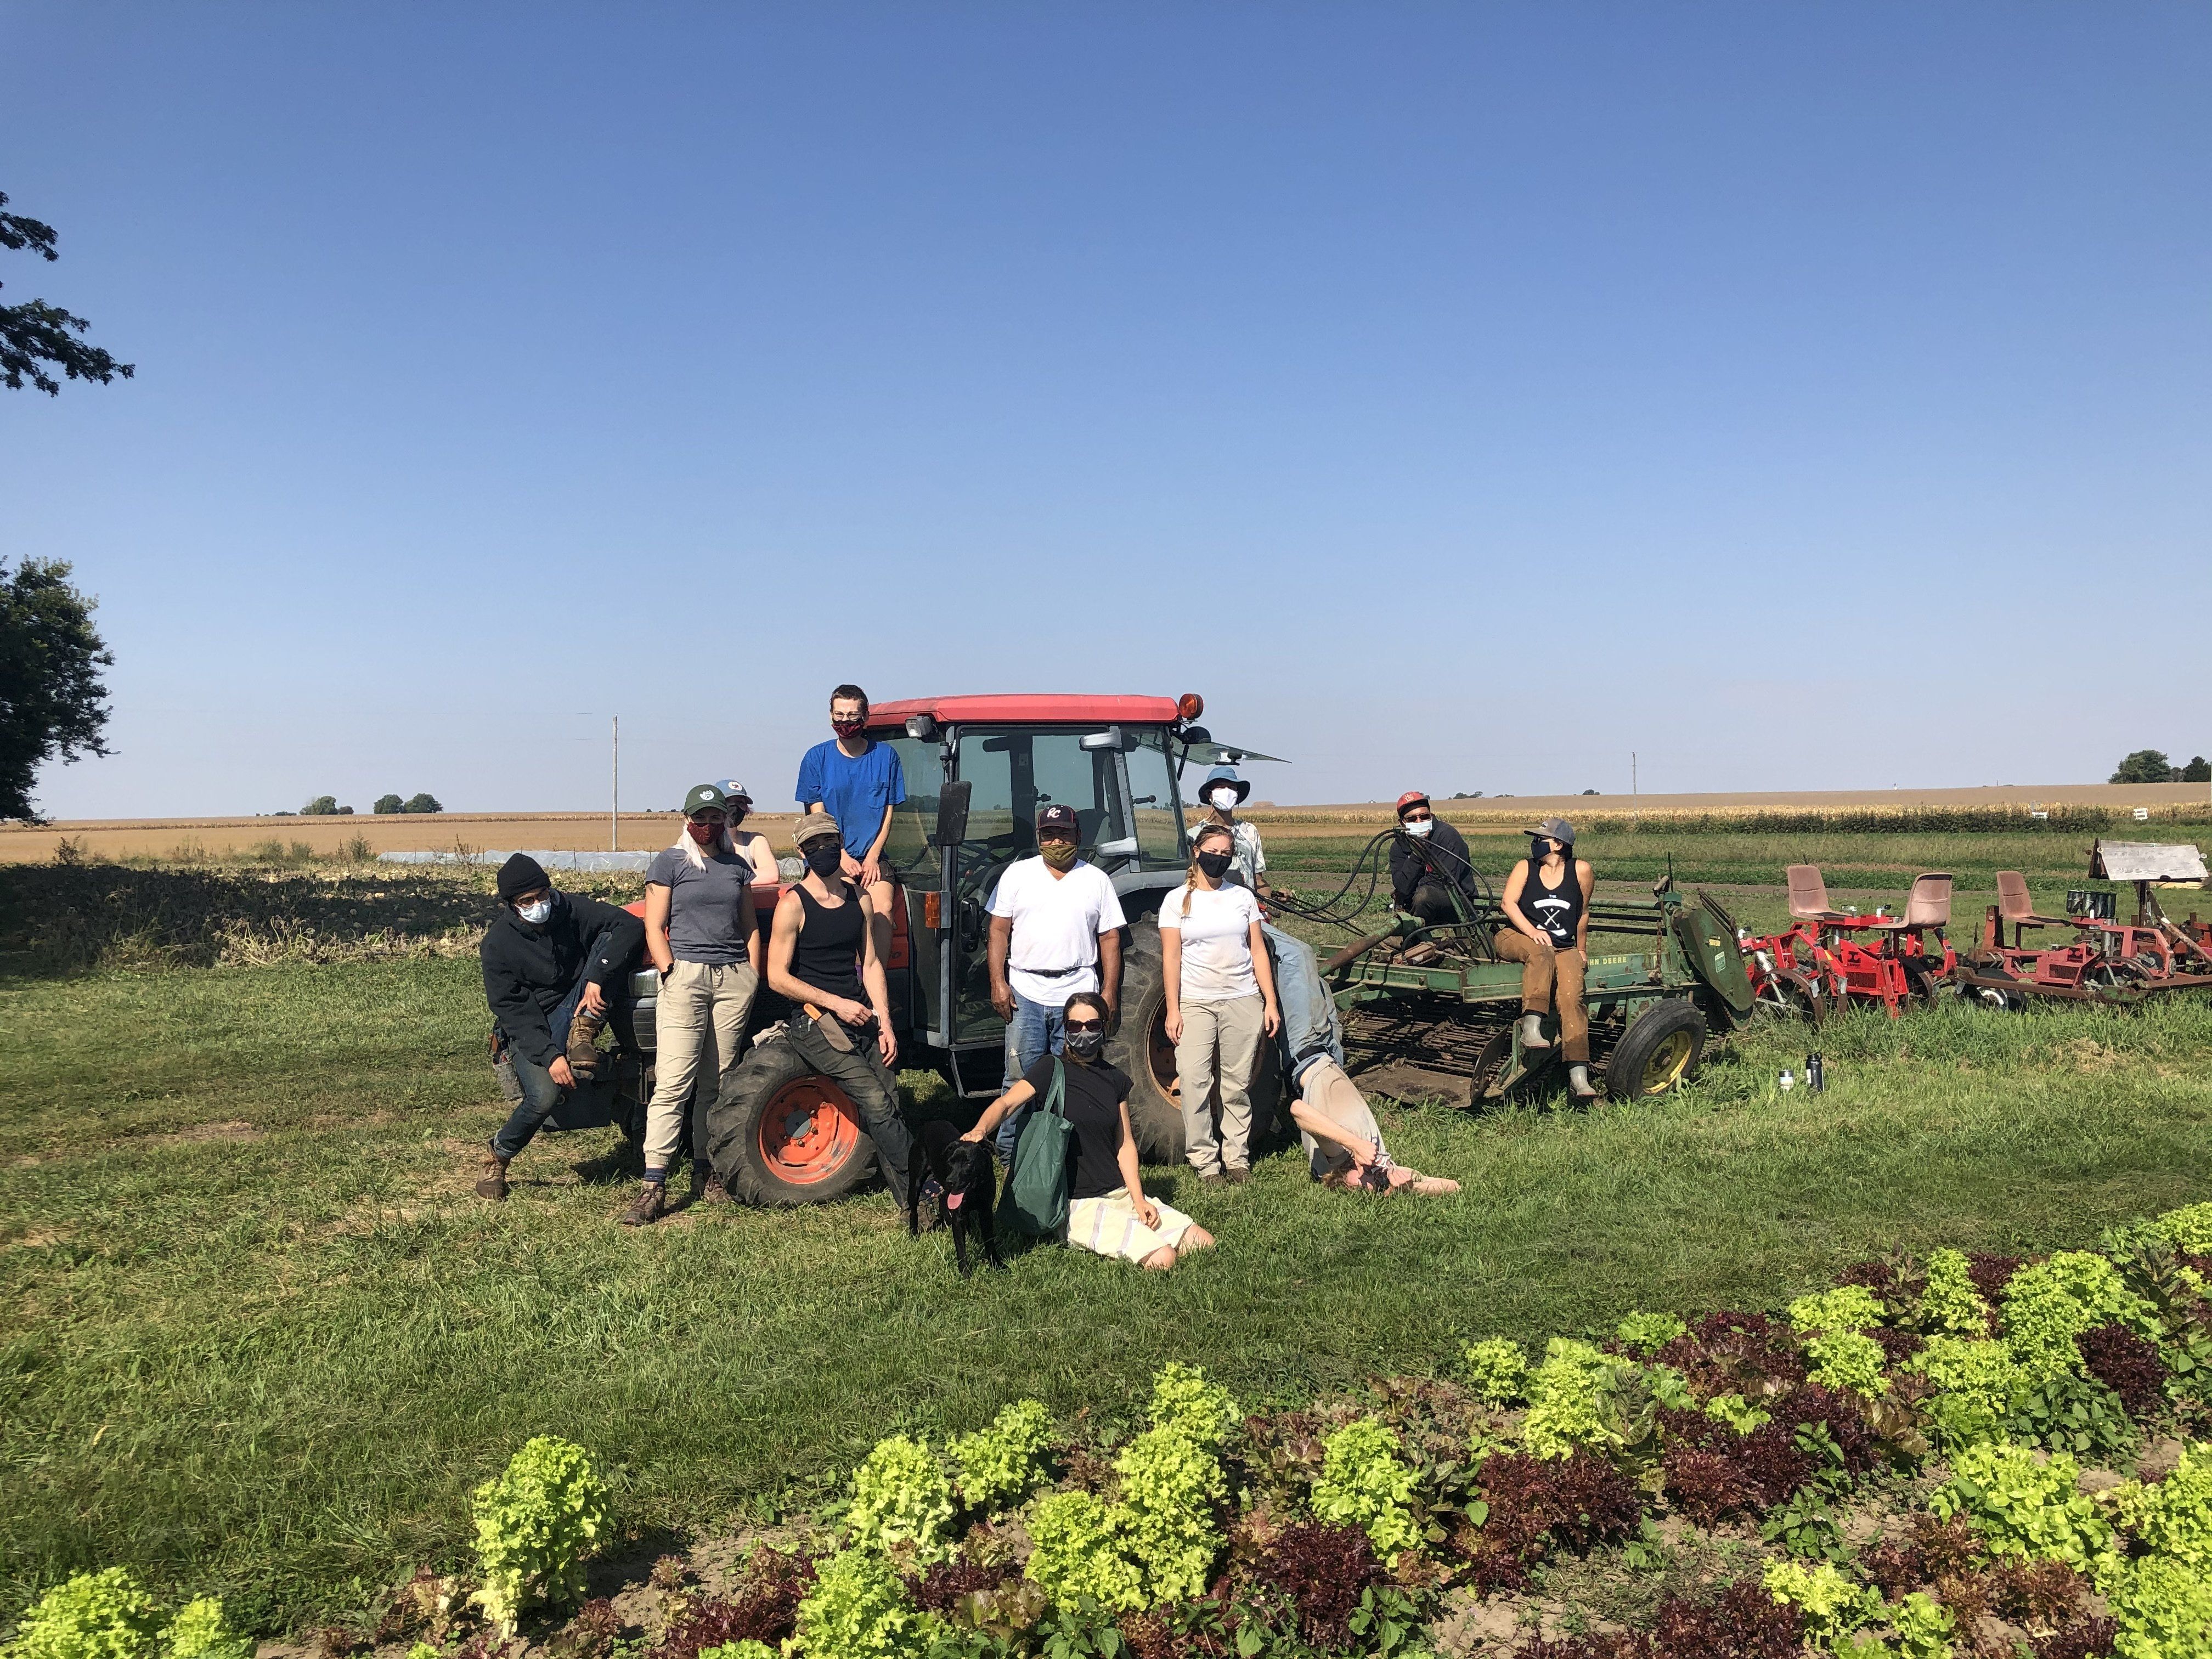 Previous Happening: Farm Happenings for September 30, 2020: Fall CSA Shares Coming Soon